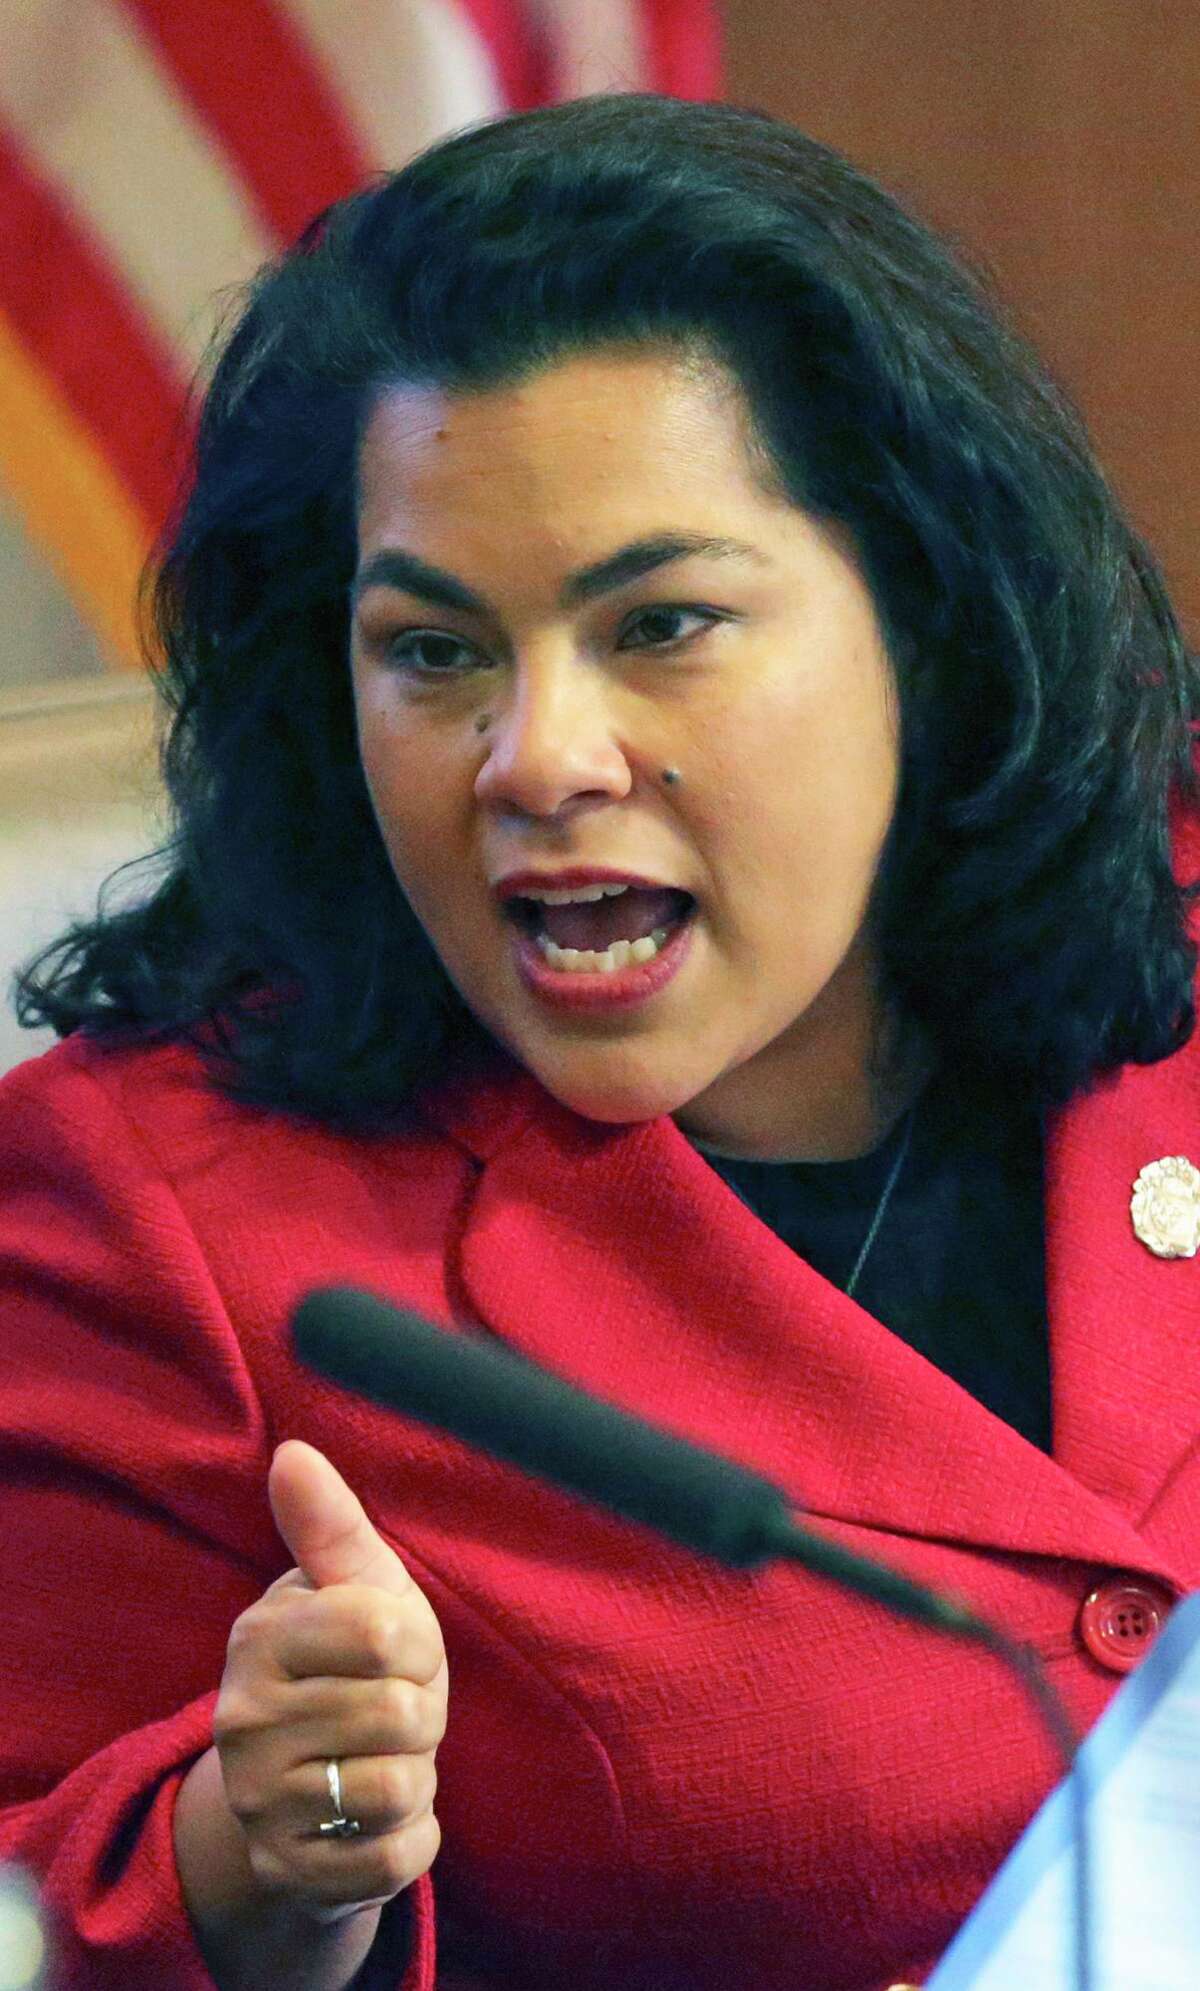 San Antonio City Councilwoman Rebecca Viagran has been appointed to the six-member Alamo Management Committee and promoted to tri-chair on the 30-member Alamo Citizen Advisory Committee. Mayor Ron Nirenberg decided to appoint her as a replacement for Councilman Roberto Treviño.